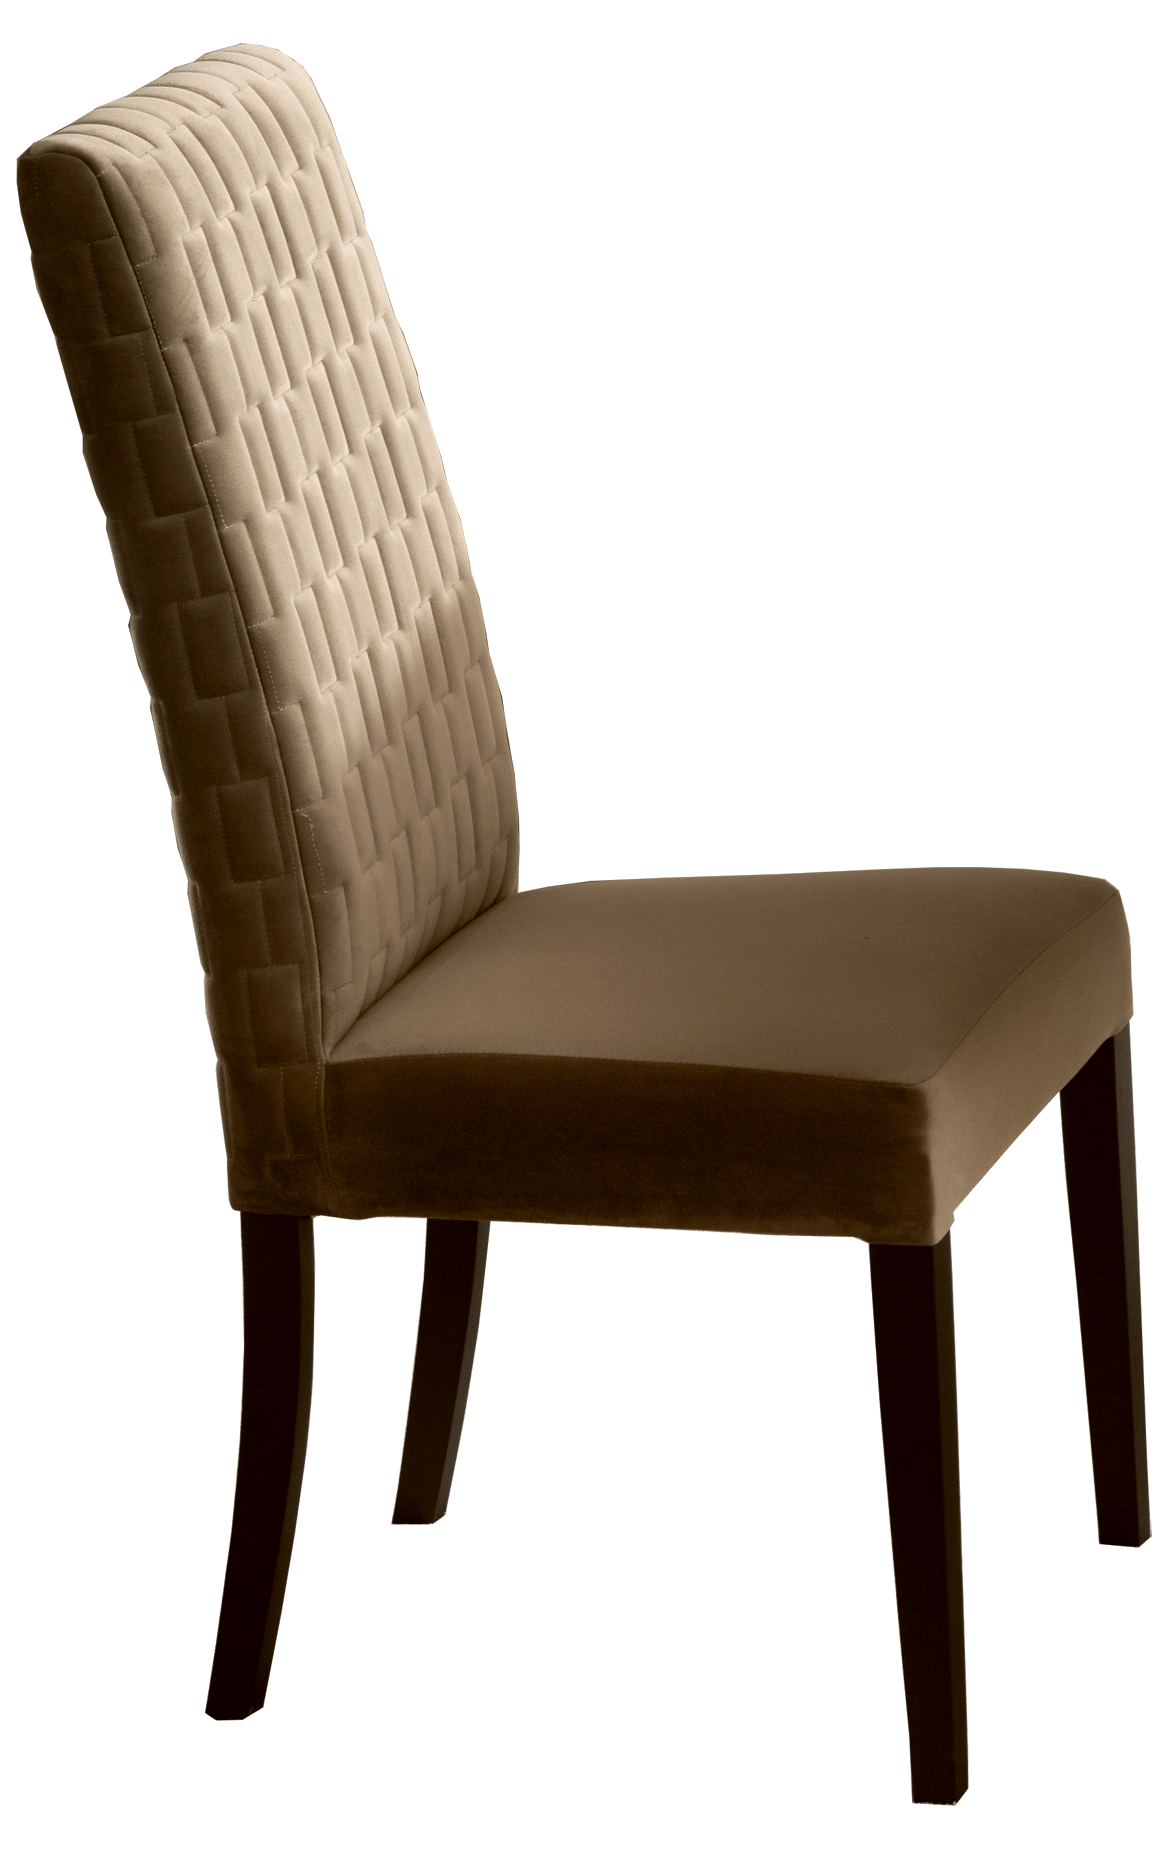 Brands Arredoclassic Dining Room, Italy Poesia Dining Chair by Arredoclassic